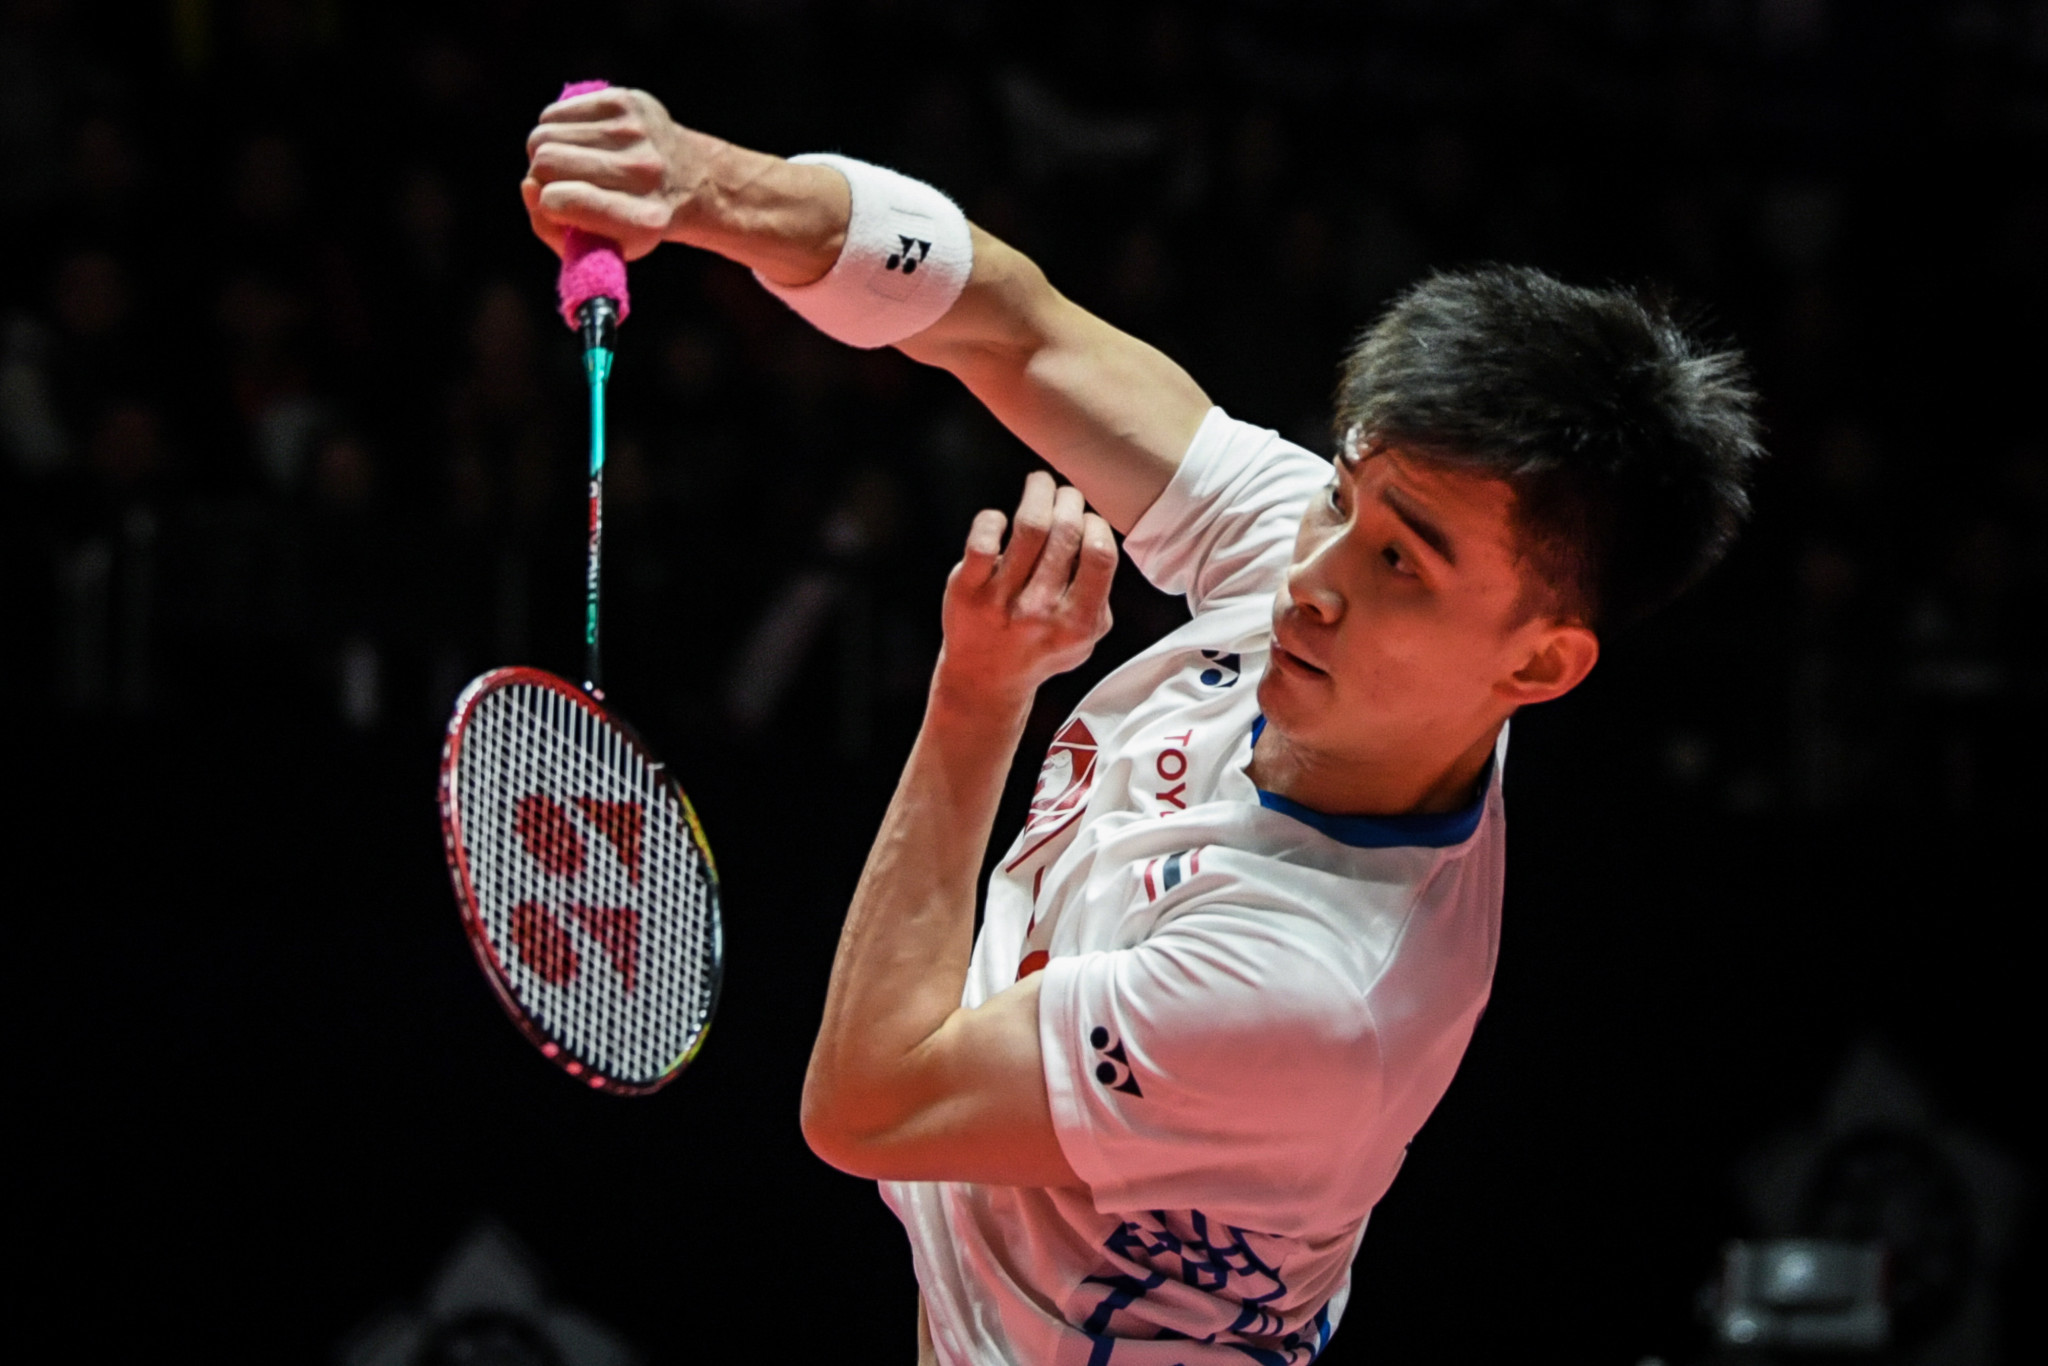 Four countries reach last eight at Badminton Asia Mixed Team Championships